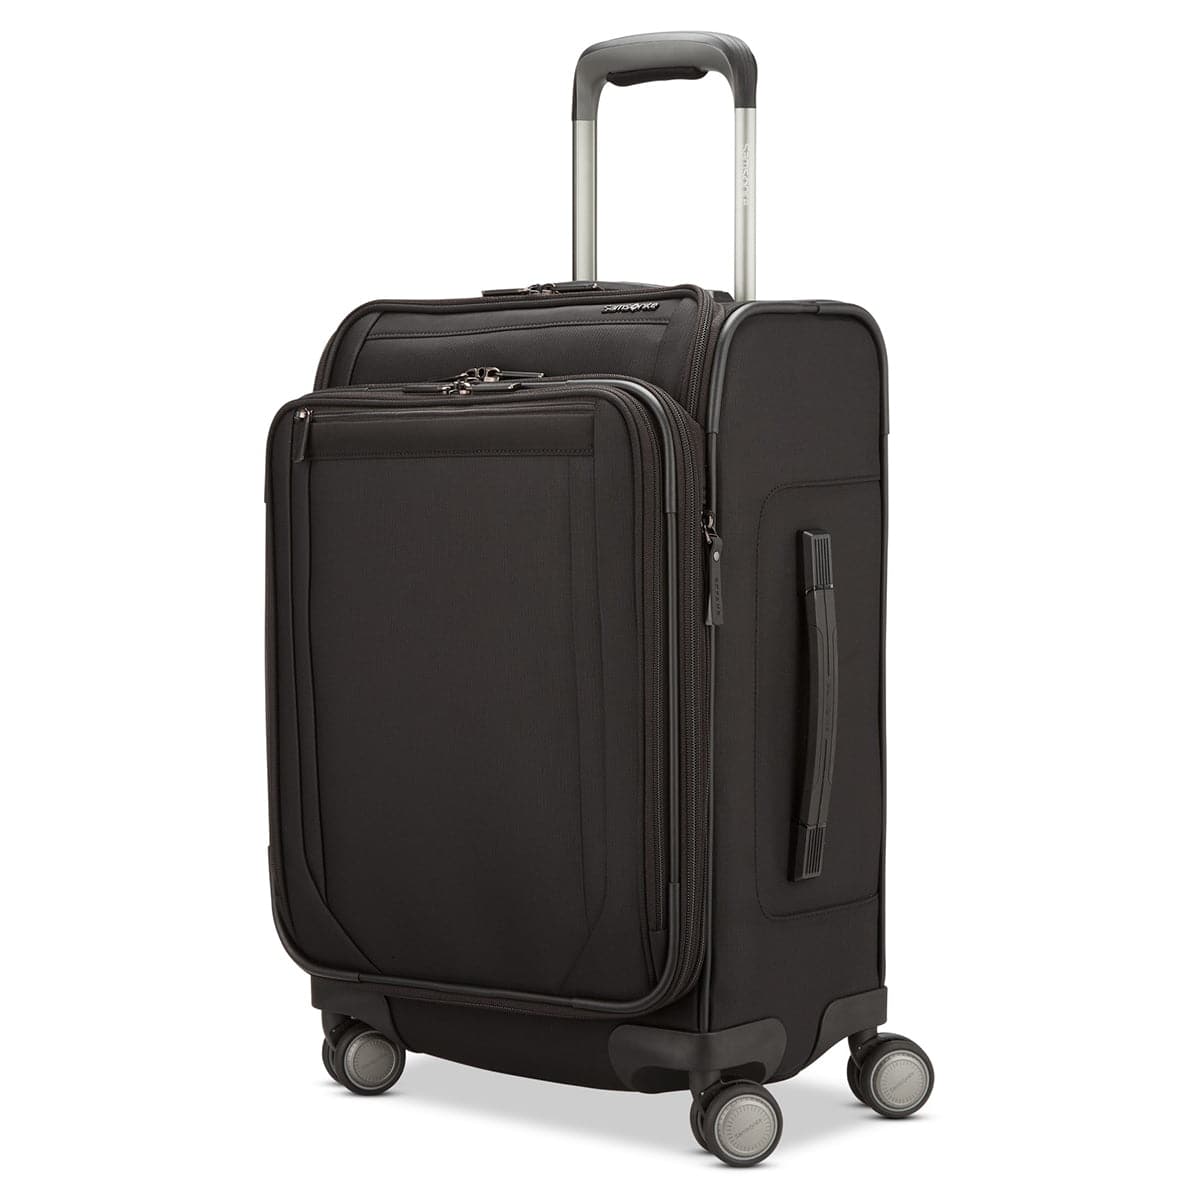 Samsonite Lineate DLX Carry On Expandable Spinner